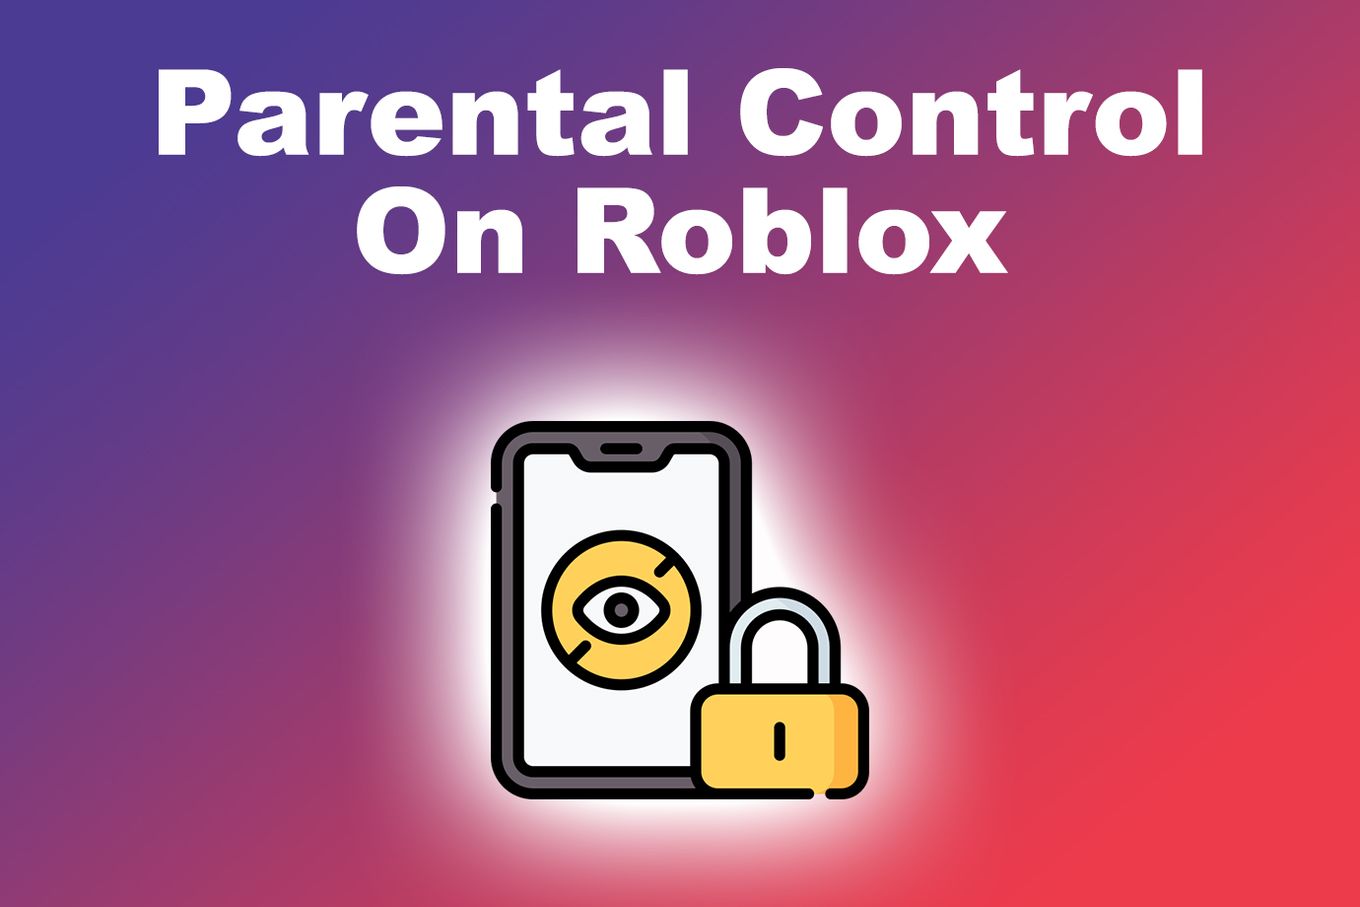 How To Get Parental Control On Roblox